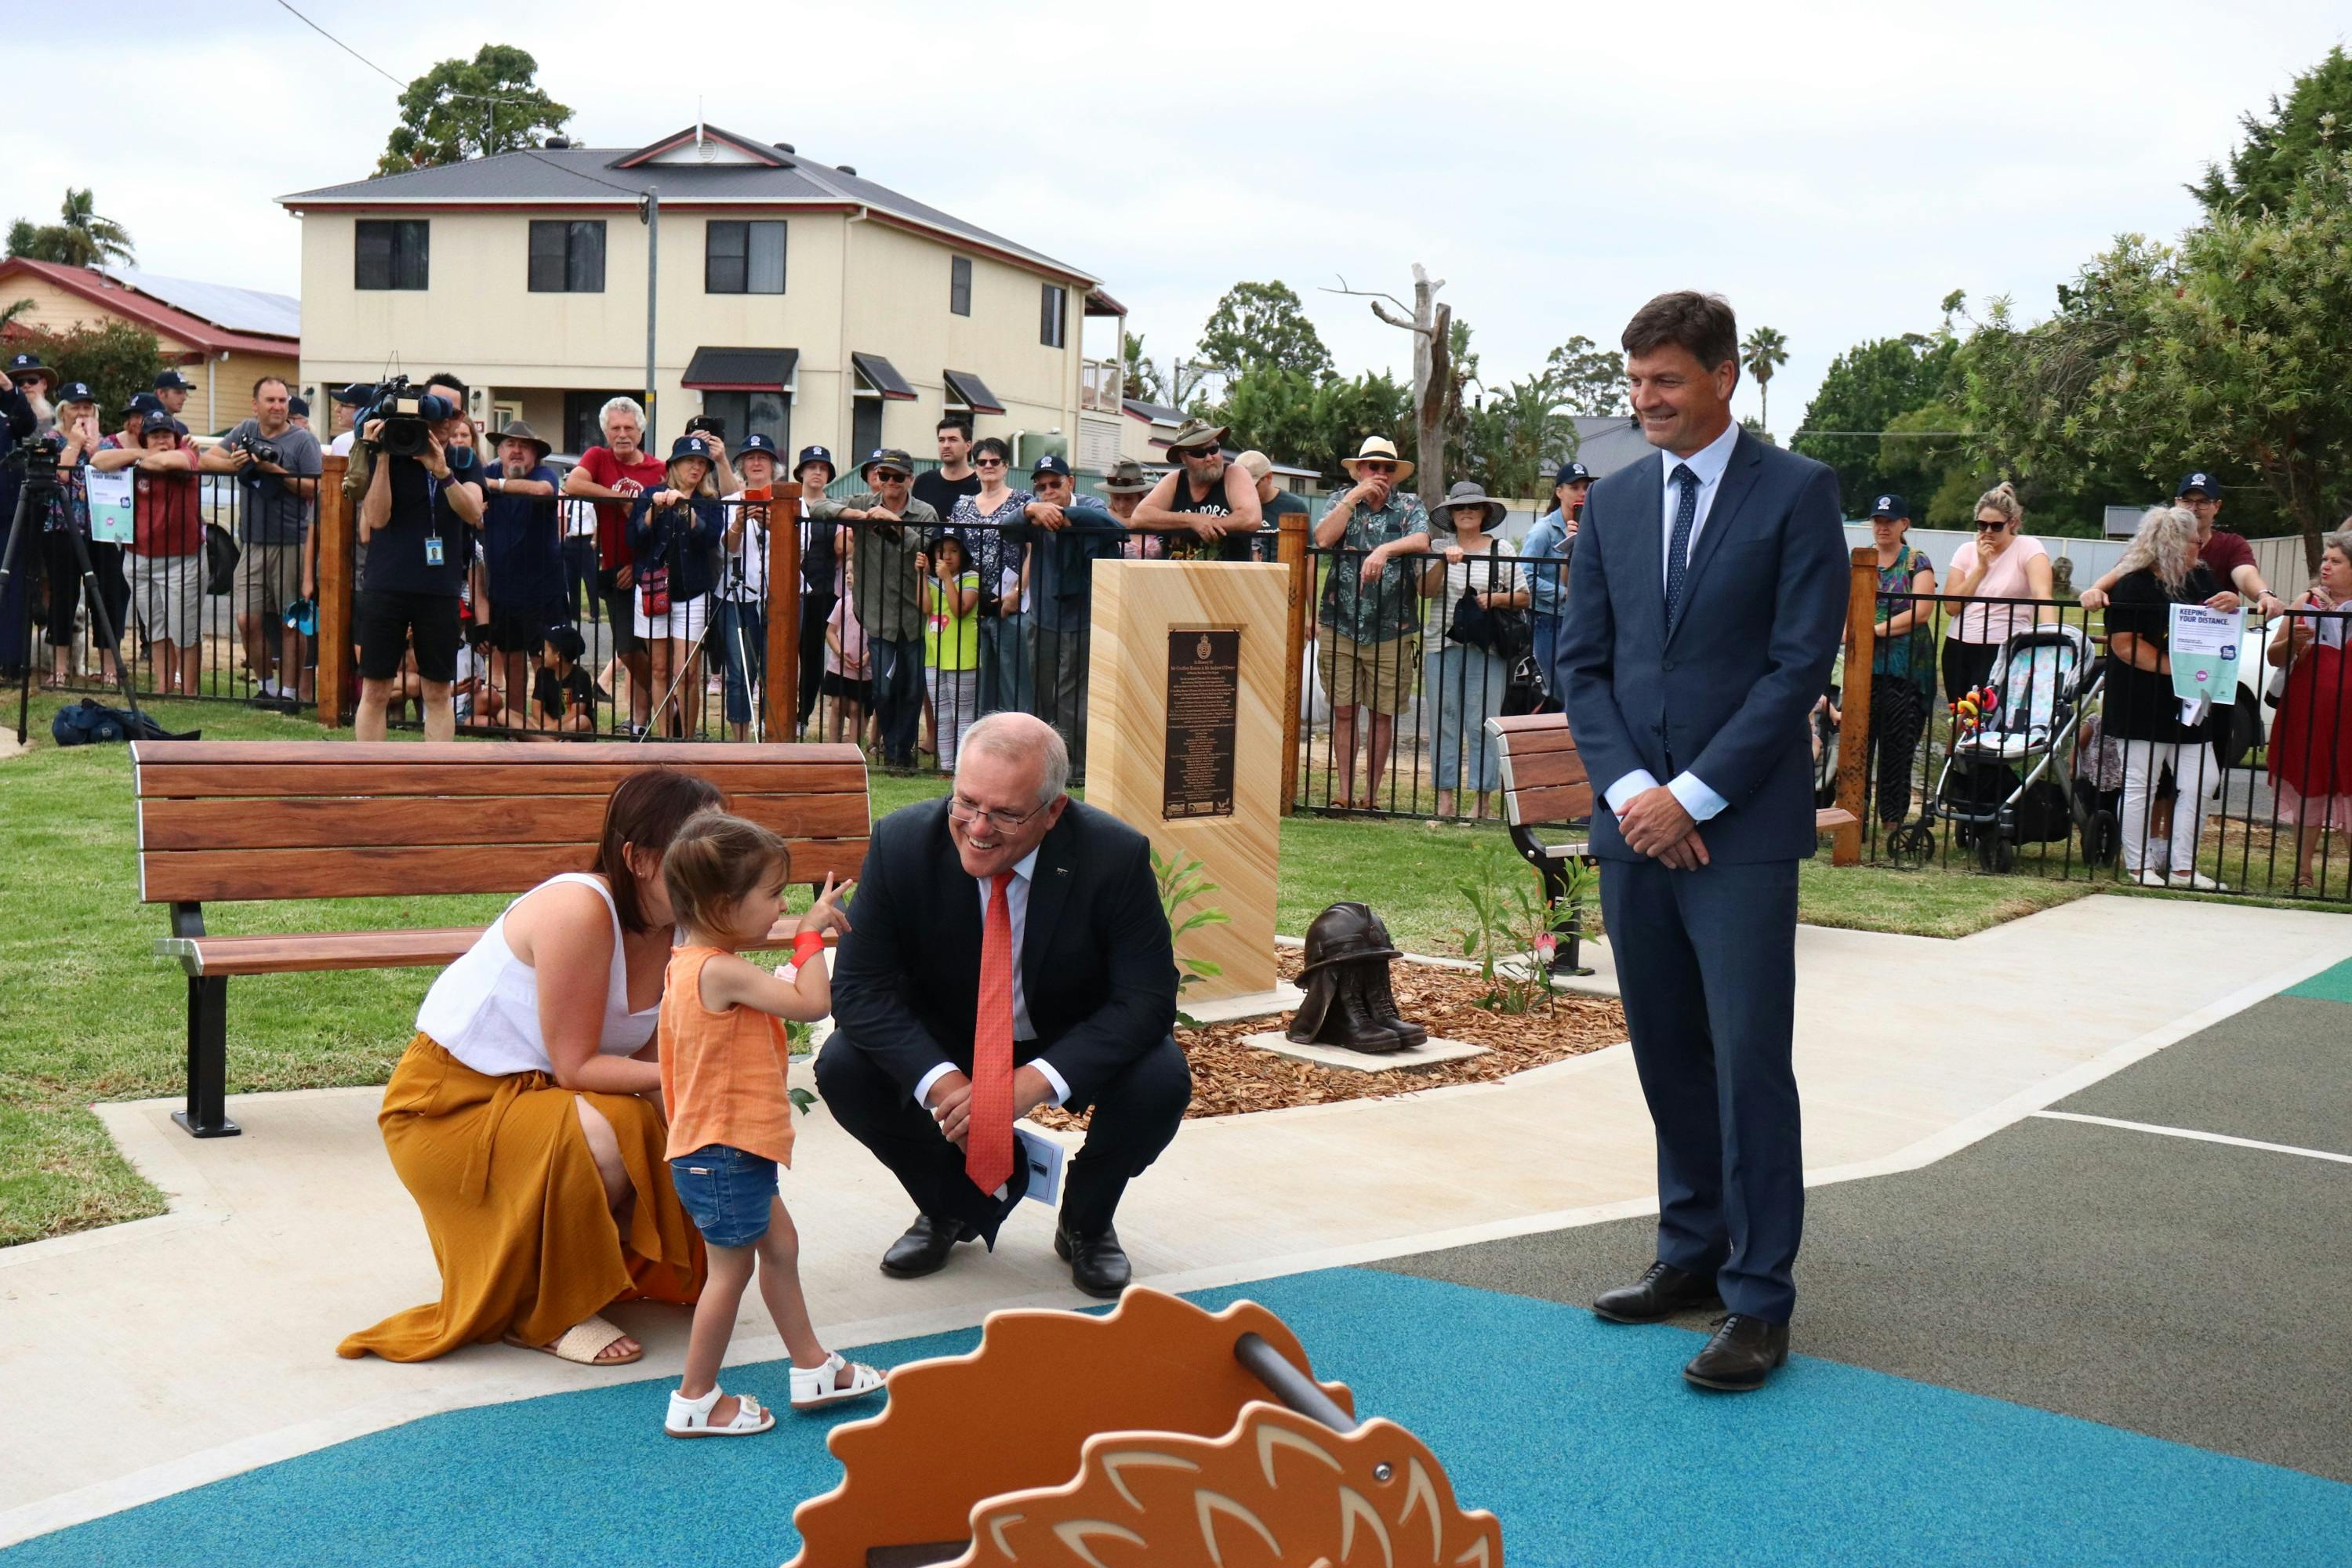 The Prime Minister with Charlotte, daughter of fallen firefighter Geoffrey Keaton at the playground, December 2020 